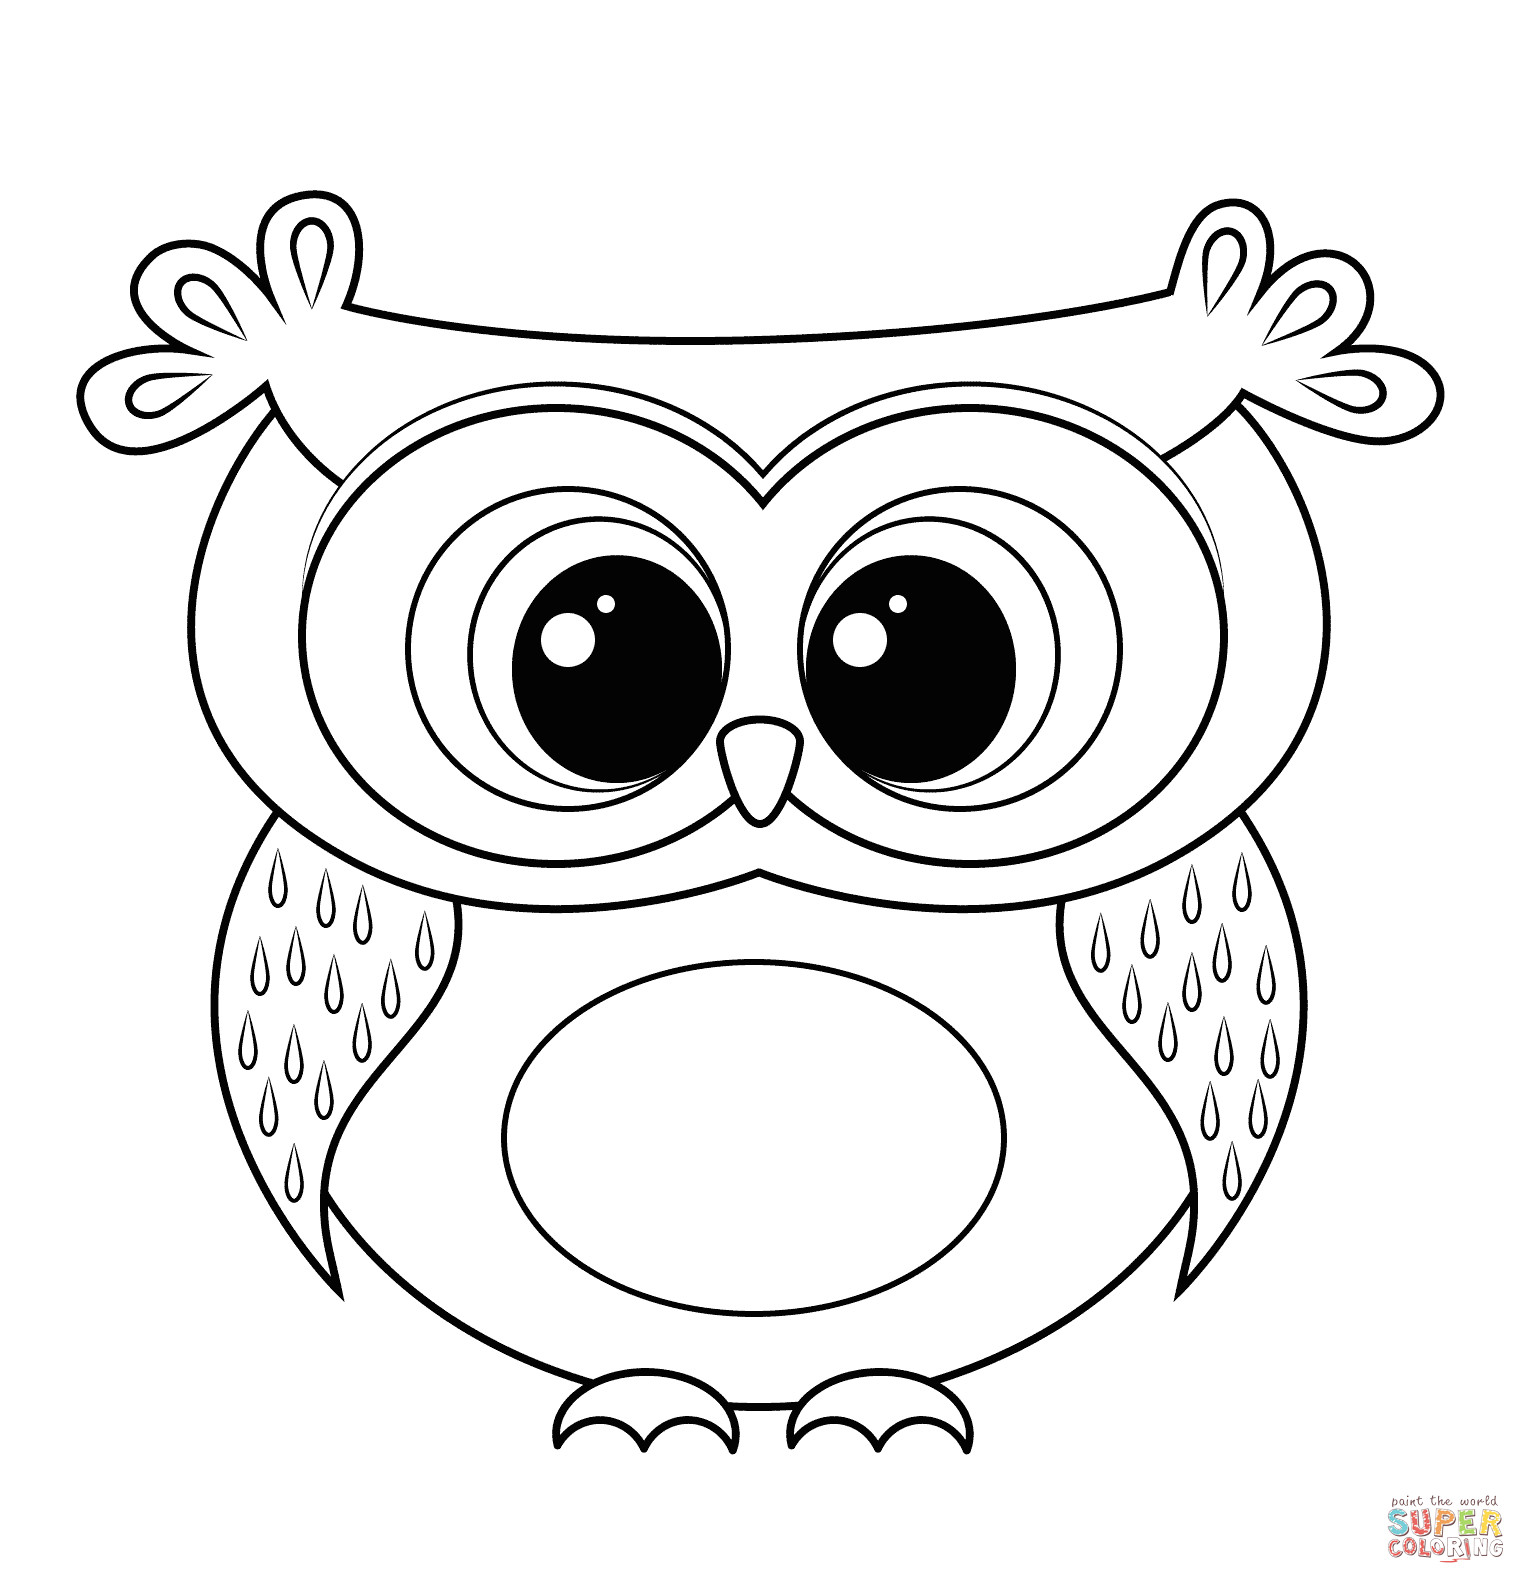 Drawing Cartoon Owl Eyes Cartoon Owl Coloring Page Free Printable Coloring Pages Designs